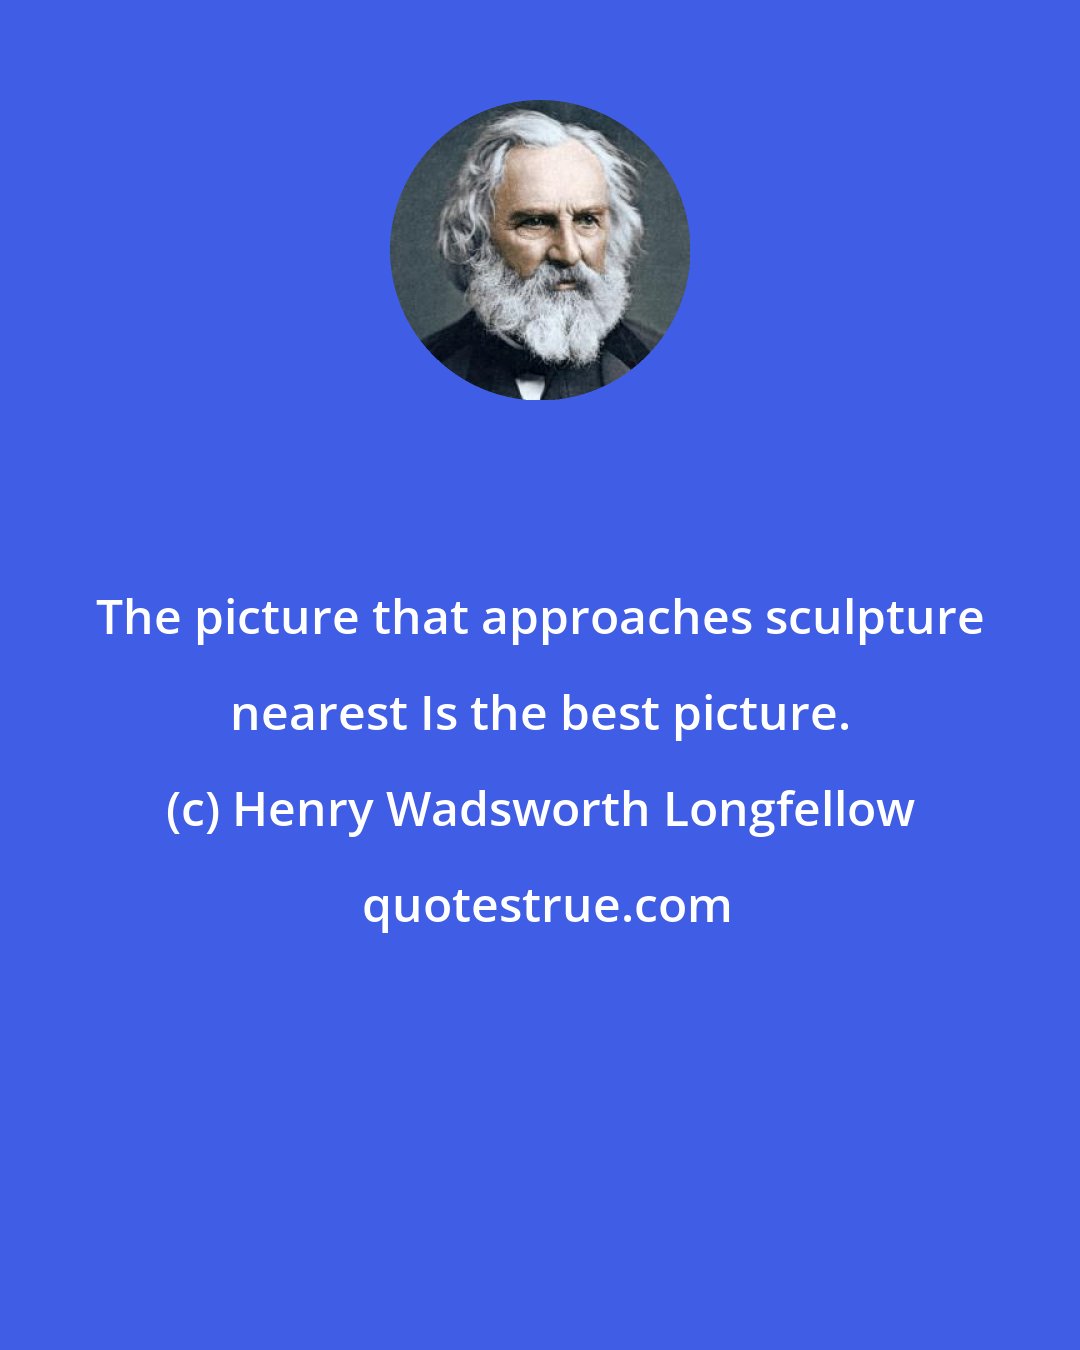 Henry Wadsworth Longfellow: The picture that approaches sculpture nearest Is the best picture.